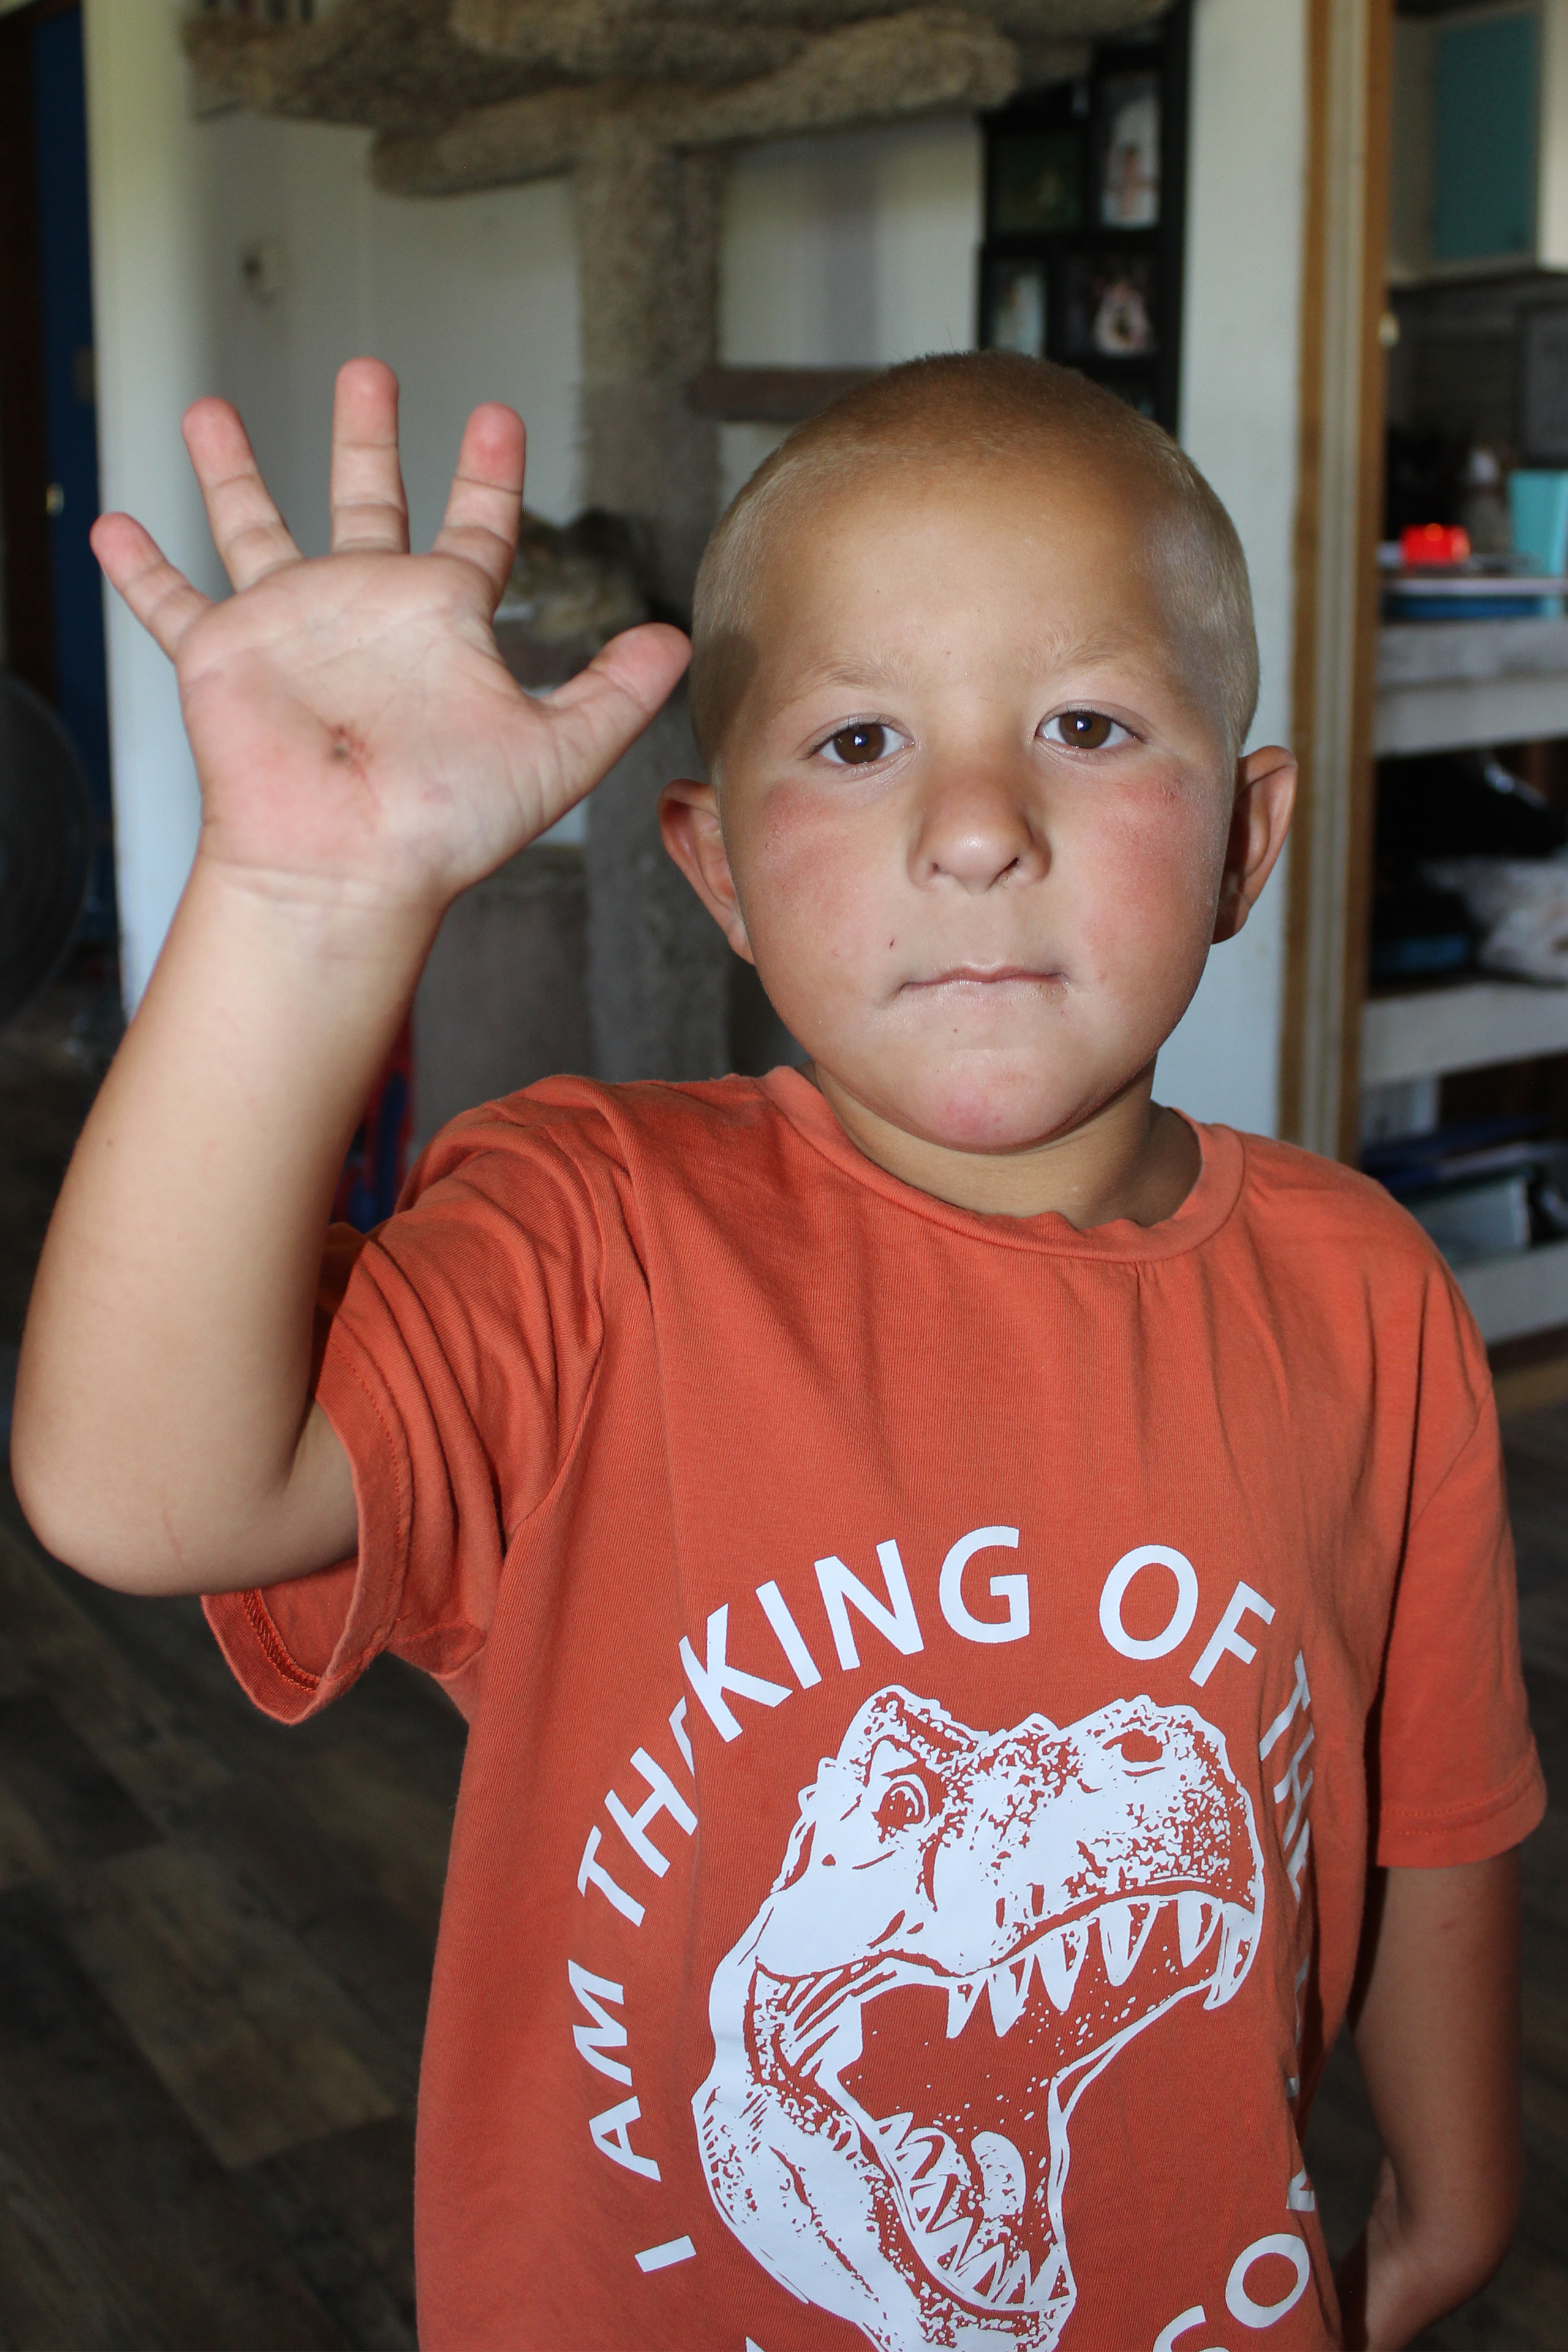 A photo shows Mason Lester raising his hand to show an injury on it.